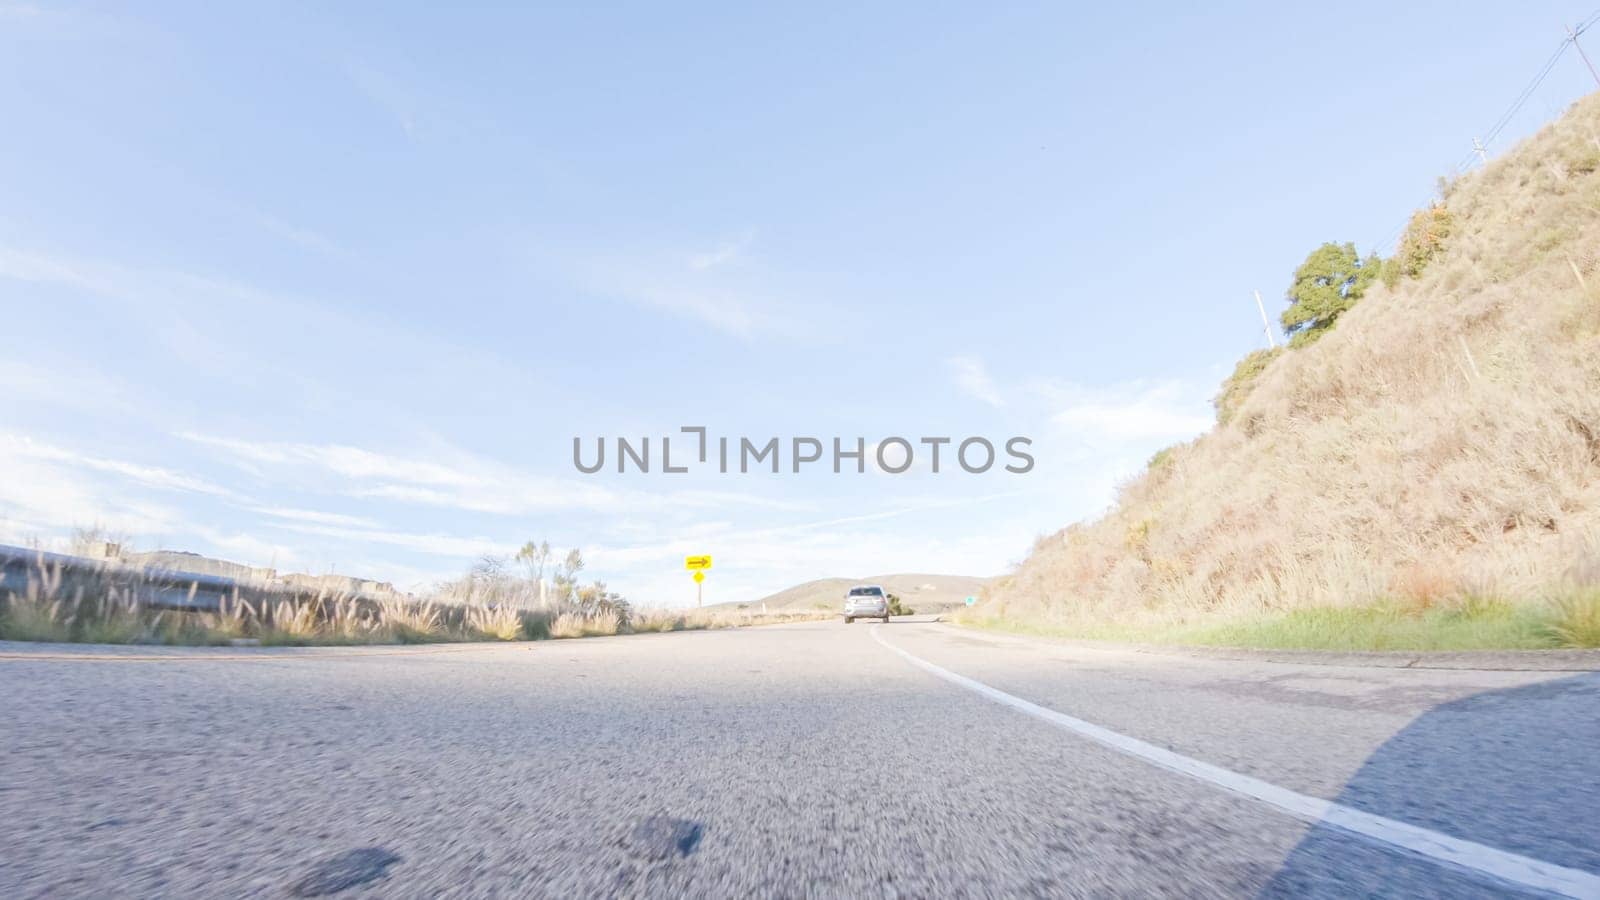 Sunny Winter Drive on HWY 1, Las Cruces by arinahabich